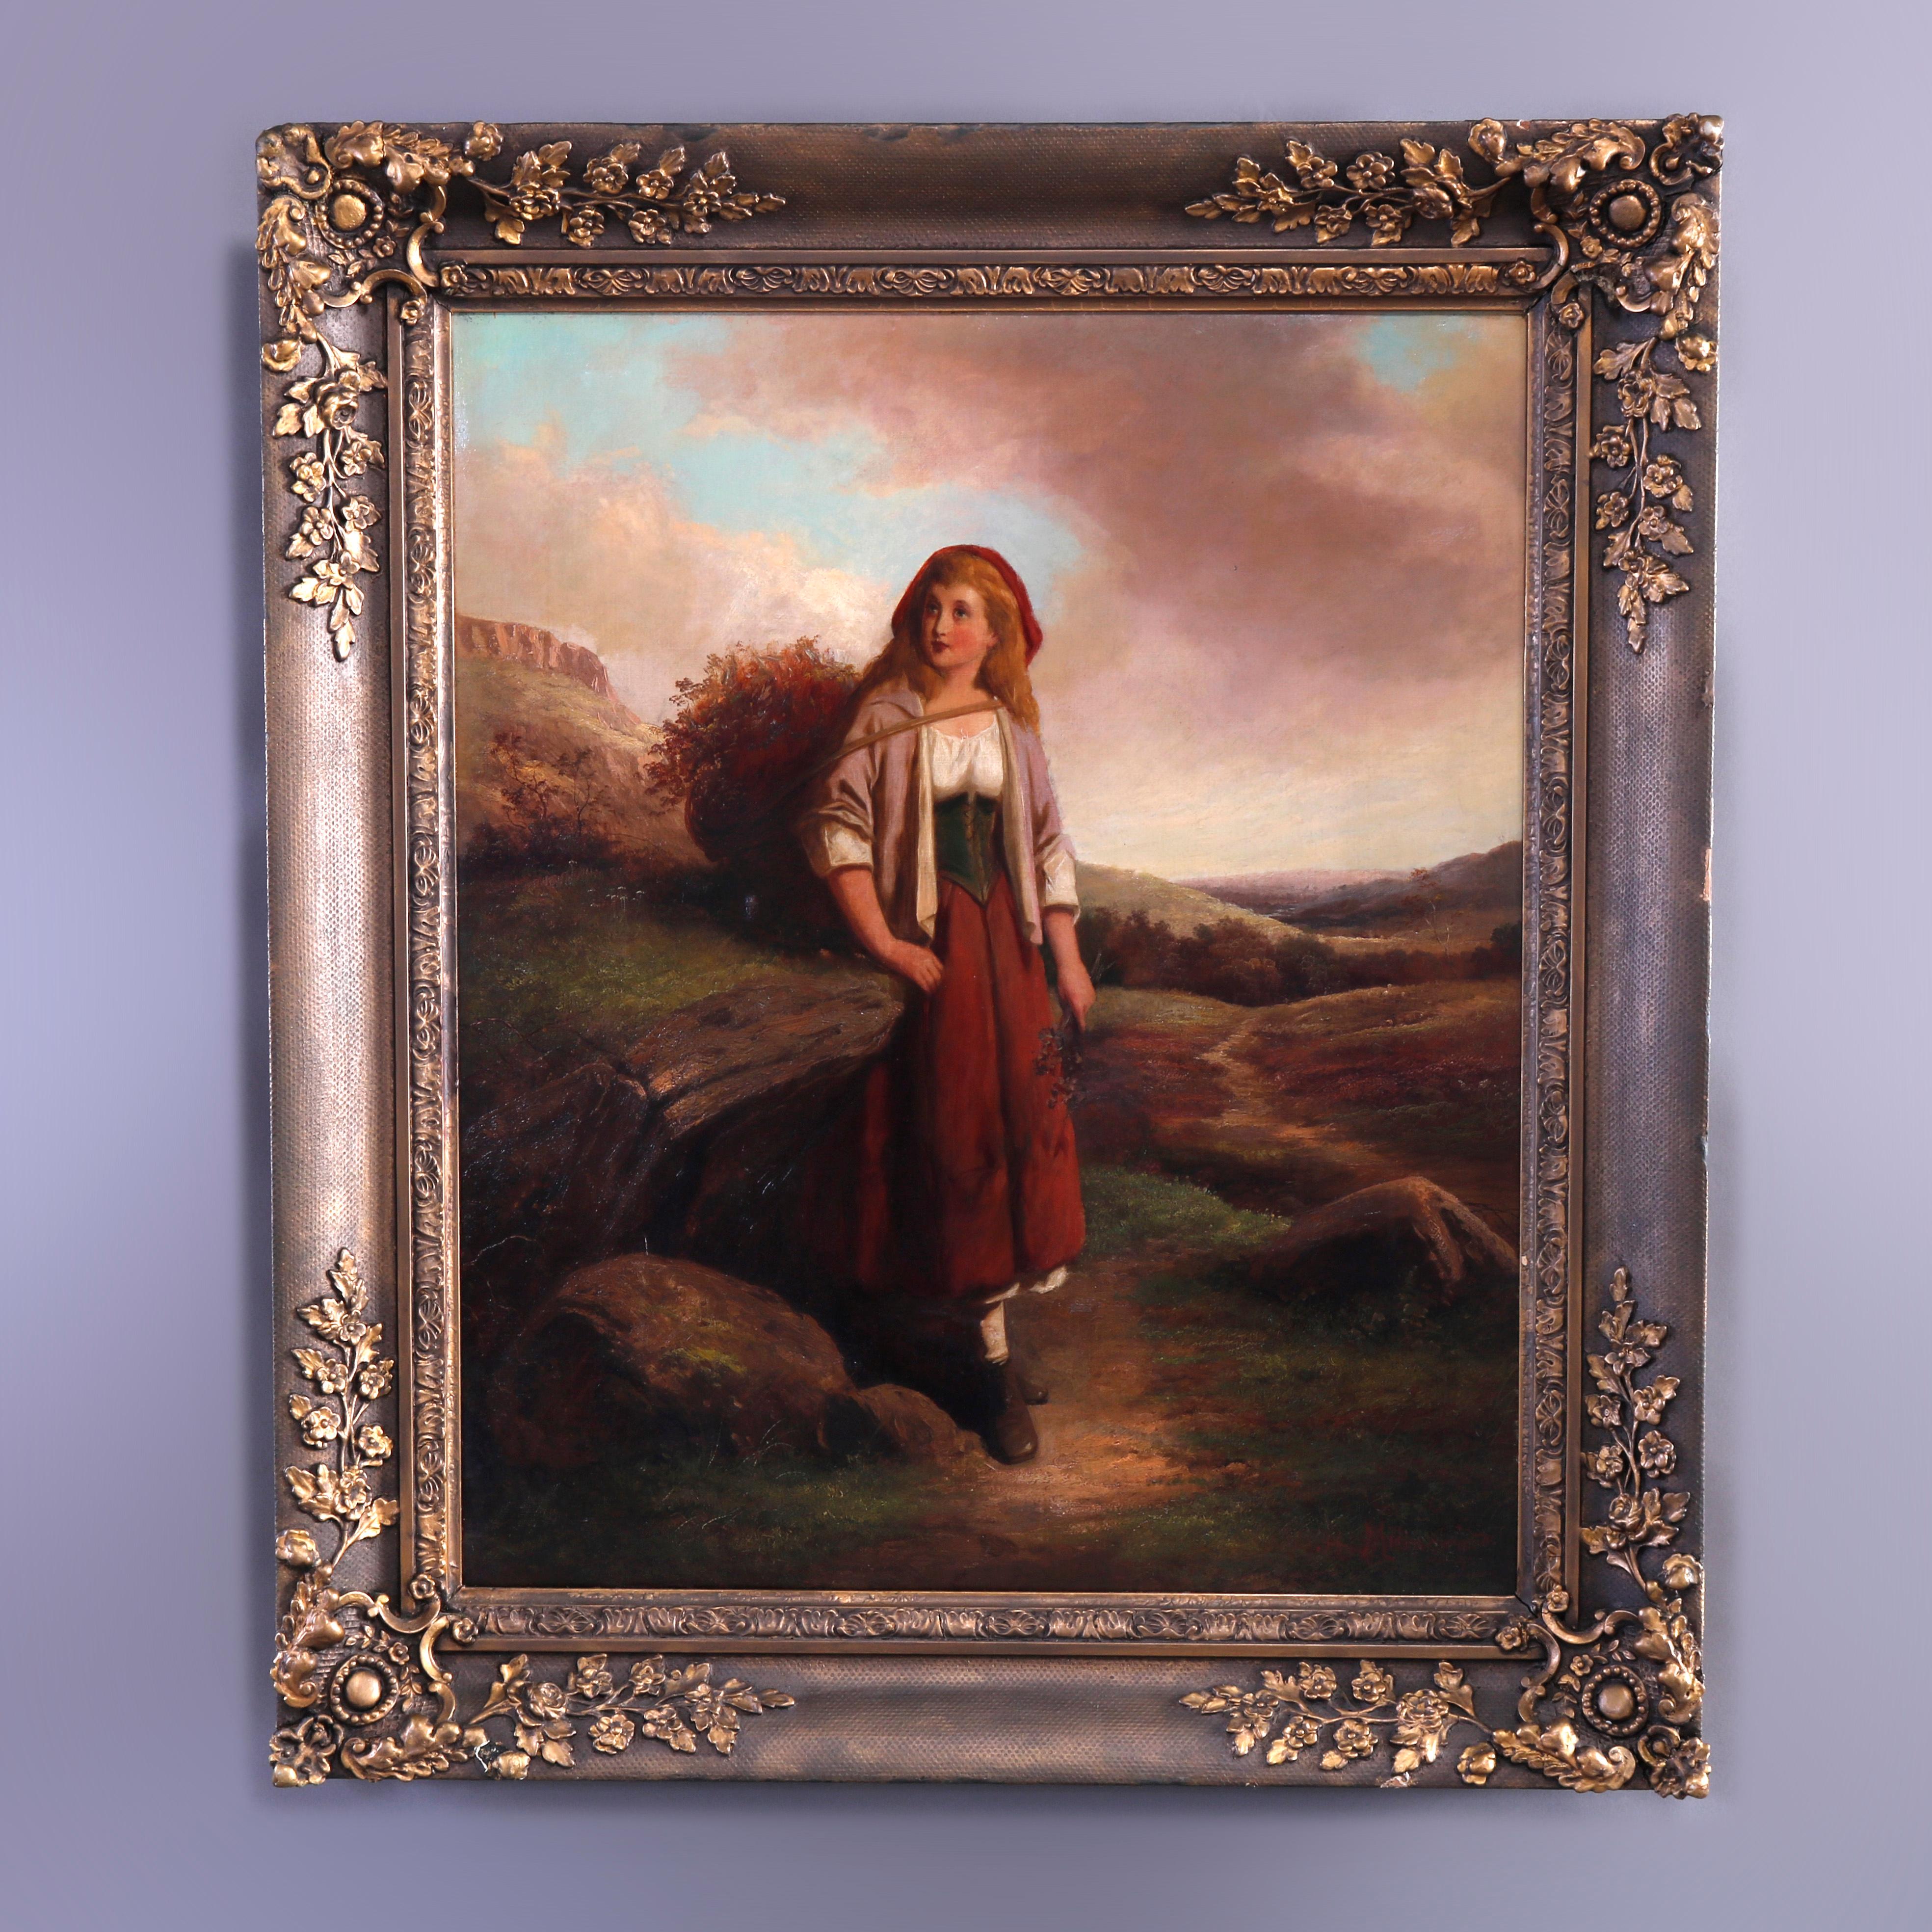 An antique and large English oil painting offers portrait of young woman in countryside setting, seated in giltwood frame with foliate elements, artist signed lower right, c1870

Measures - overall 37.5''H x 32.5''W x 3.5''D; sight 25'' x 30''.